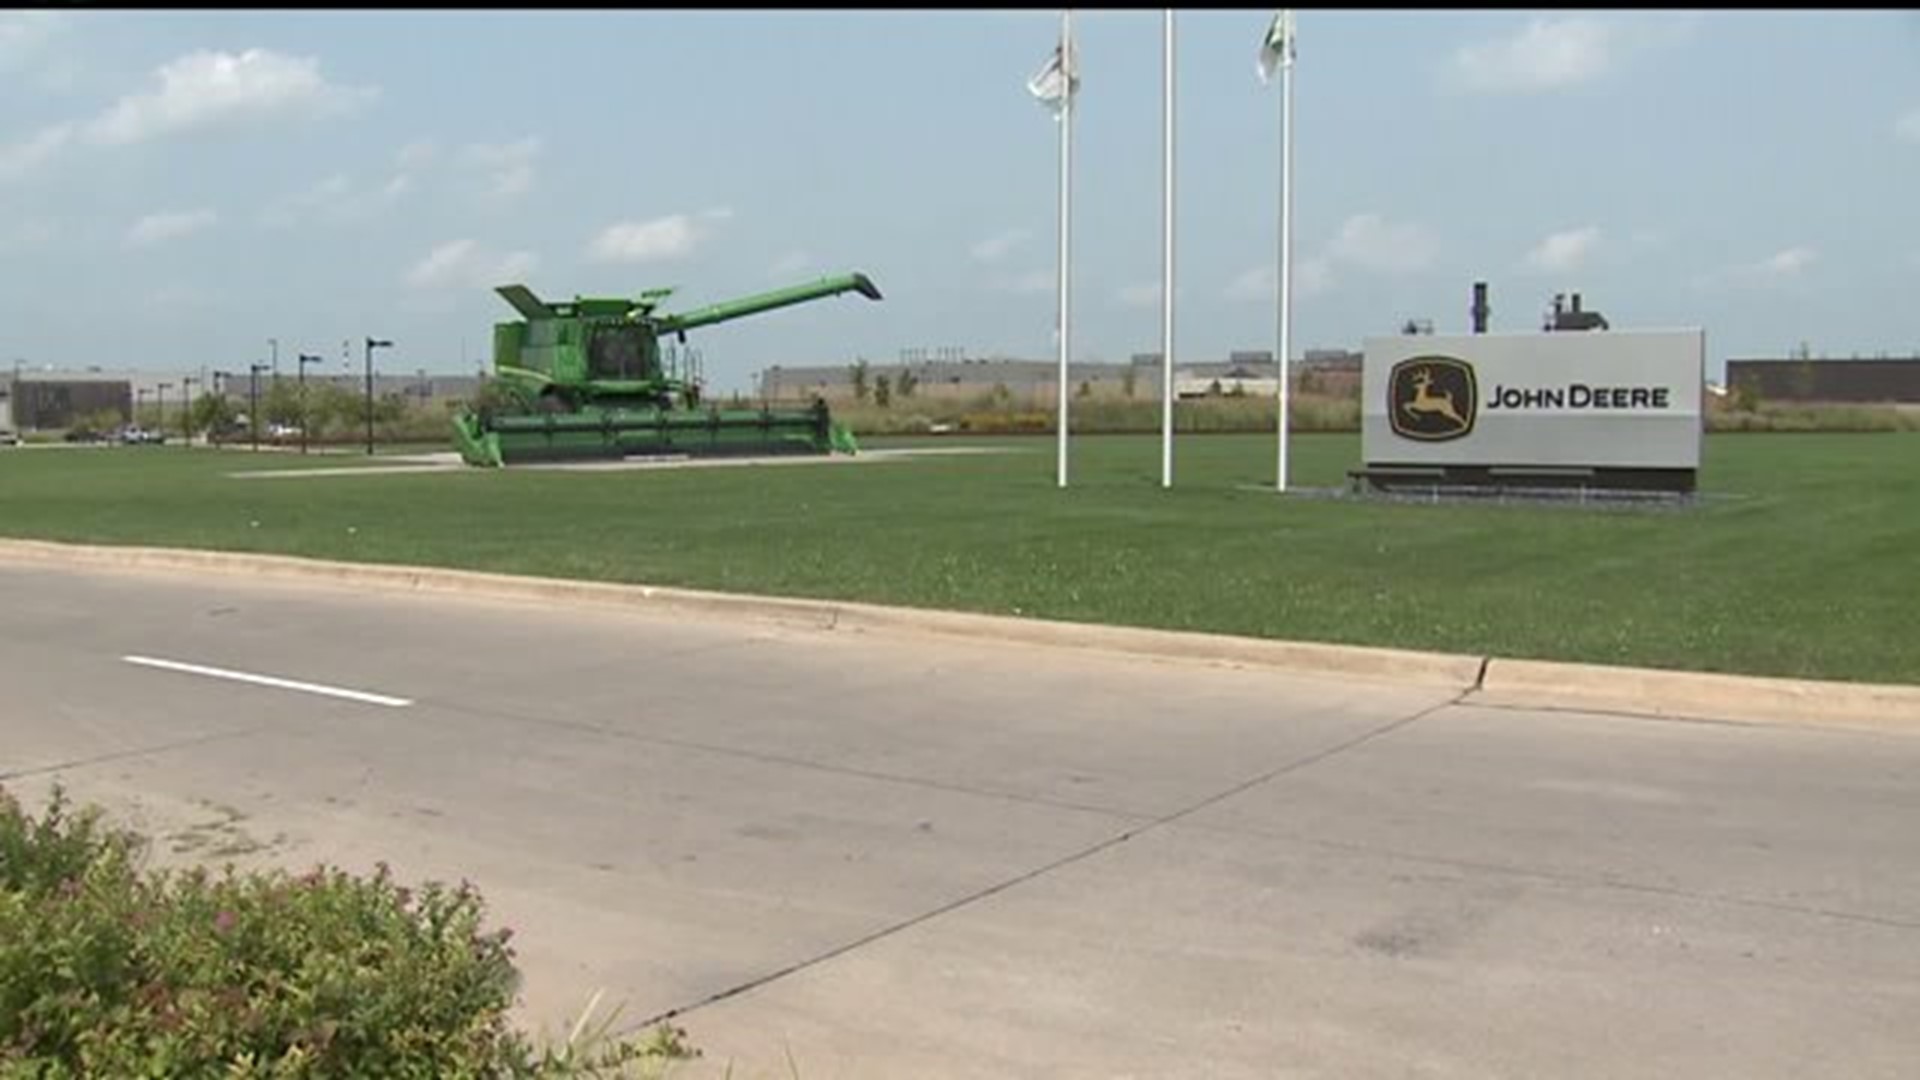 150 to be laid off at John Deere Harvester Works